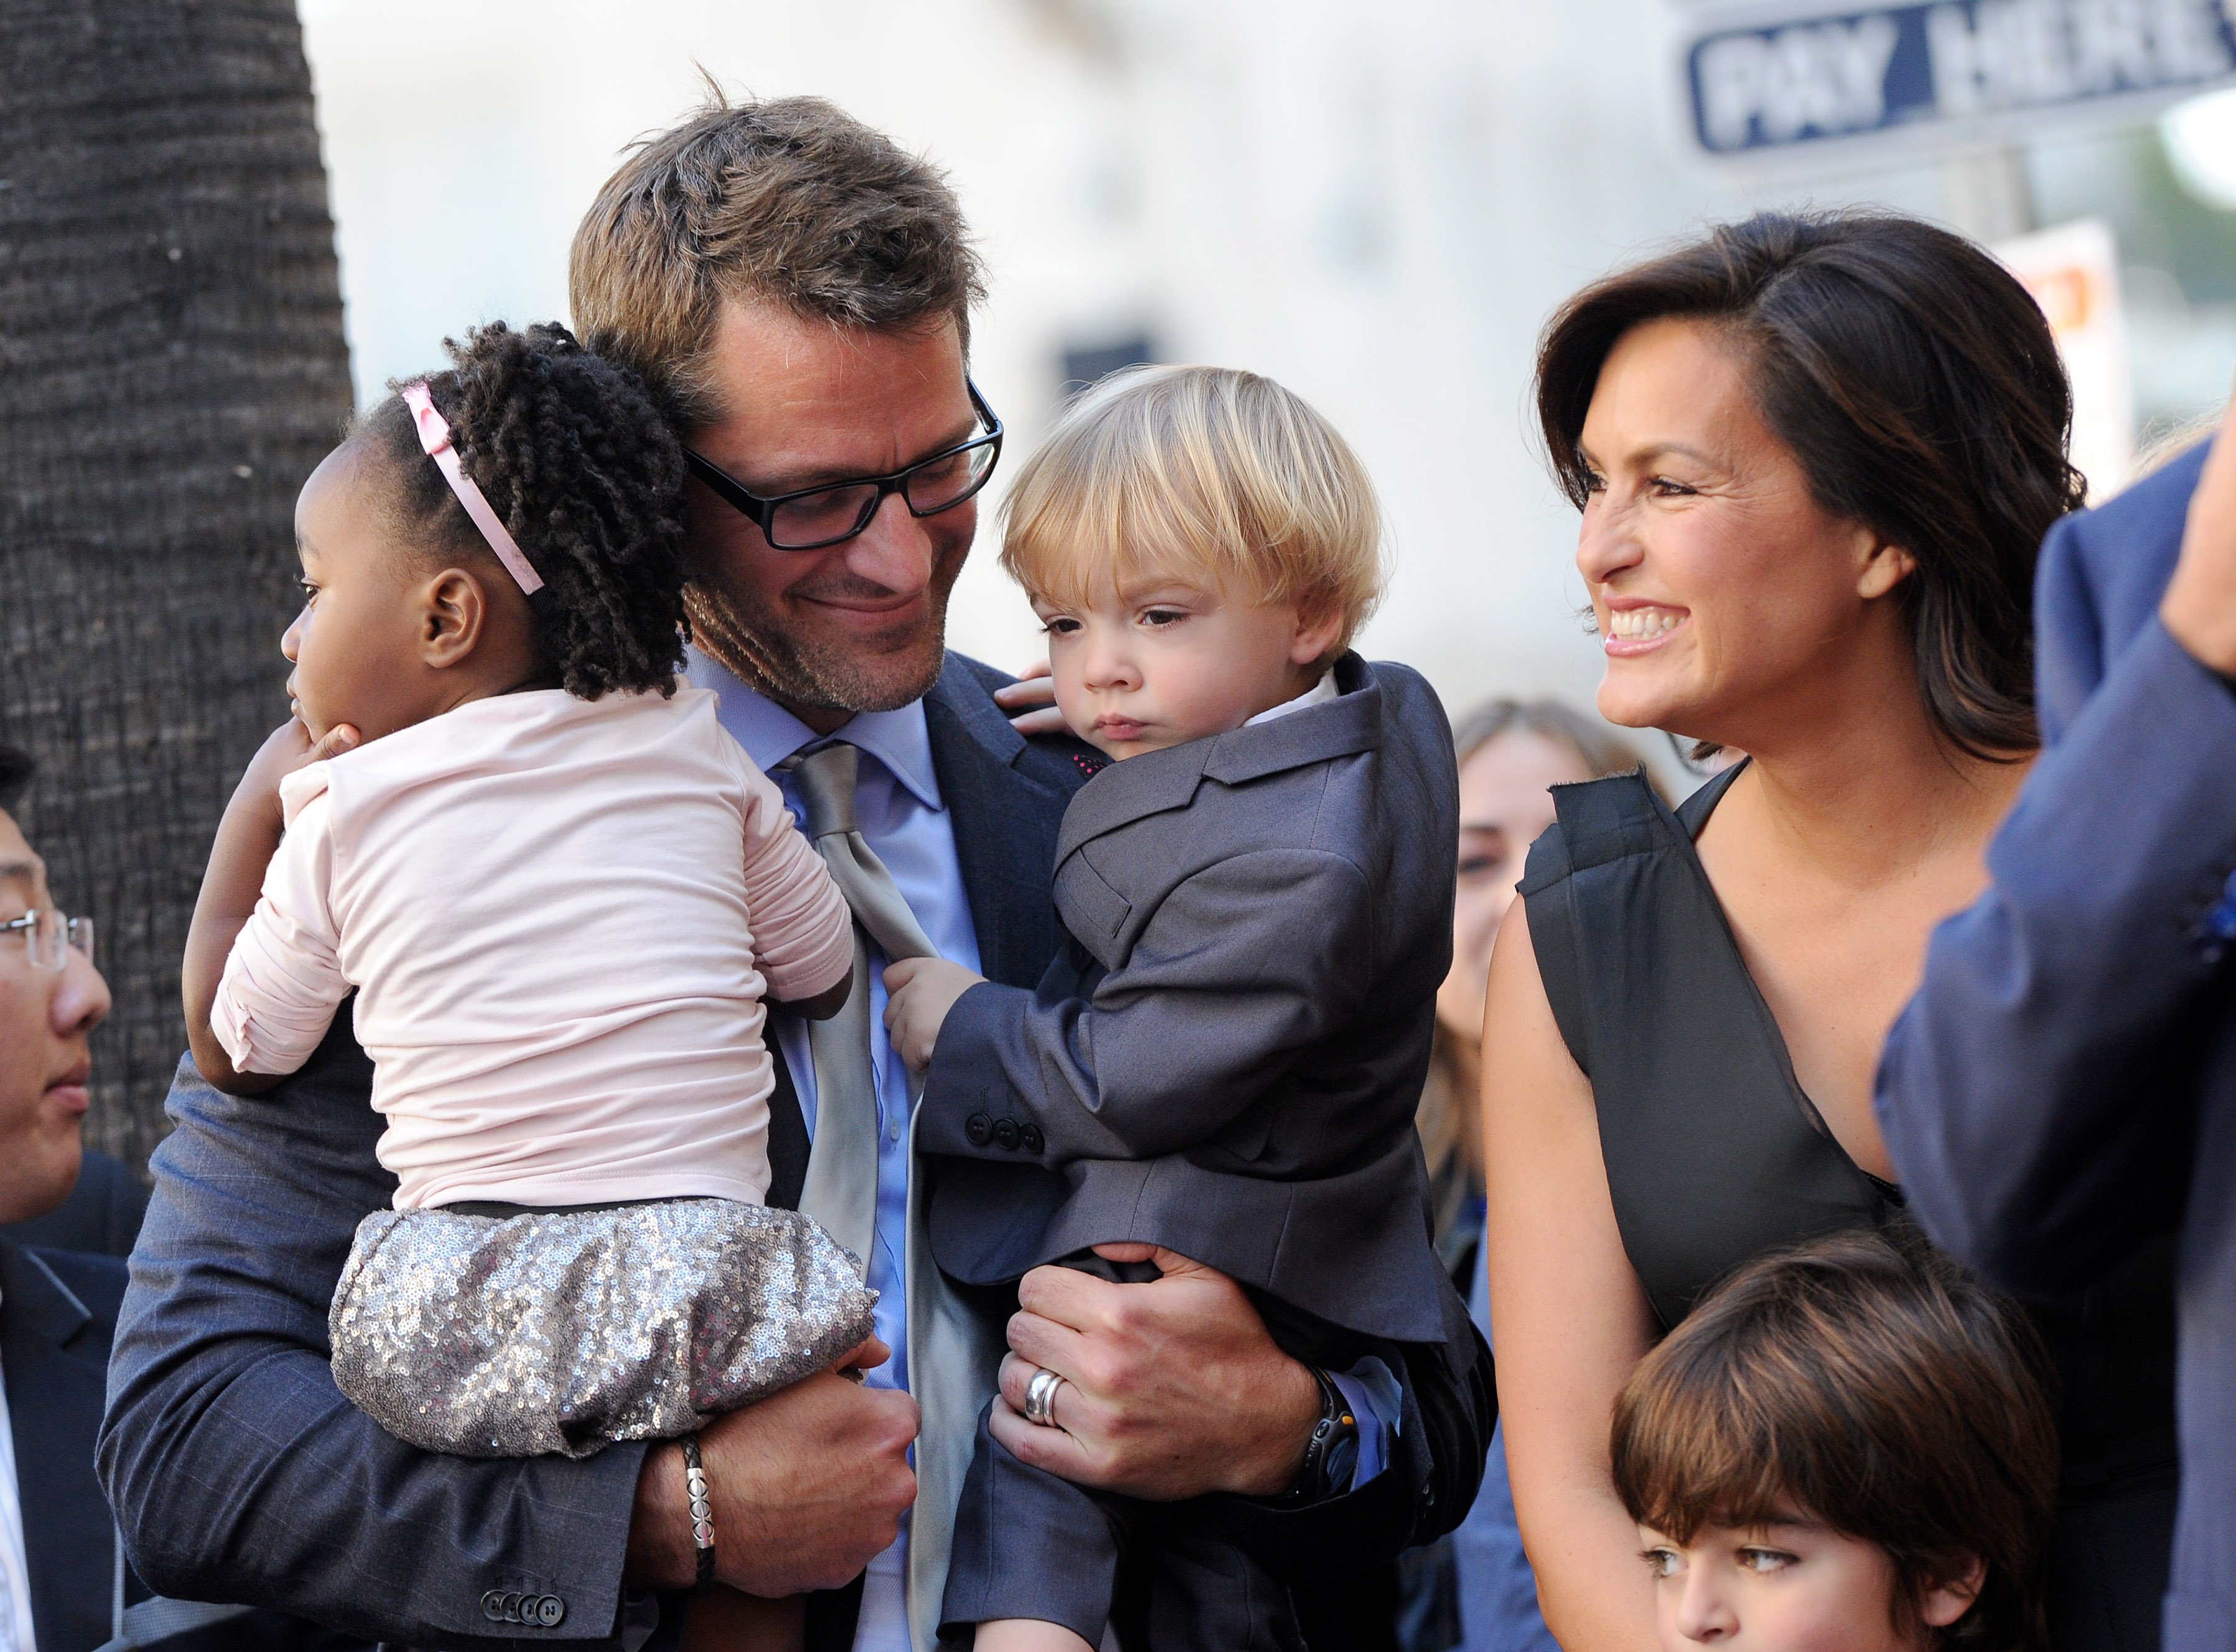 Mariska Hargitay, Peter Hermann, daughter Amaya and son Andrew on The Hollywood Walk of Fame on November 8, 2013 in Hollywood, California | Source: Getty Images